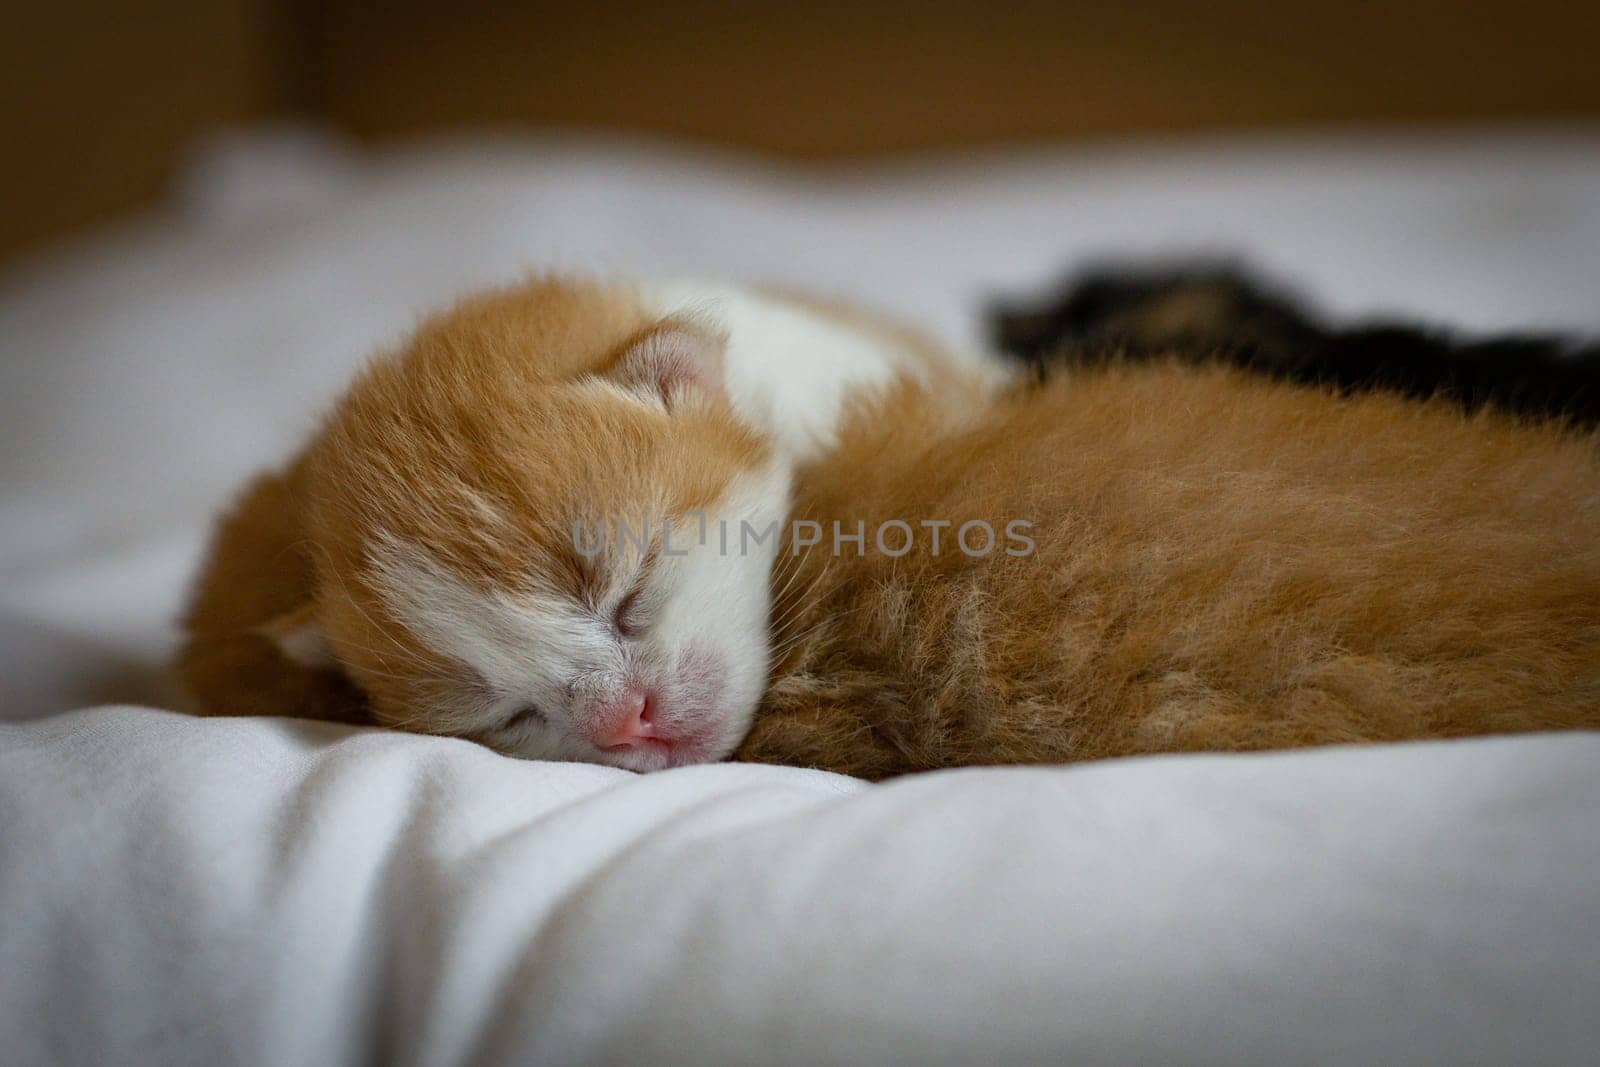 Ginger newborn kitten sleeps sweetly lying on a white sheet in a cardboard box, side view close-up. Pets lifestyle concept.